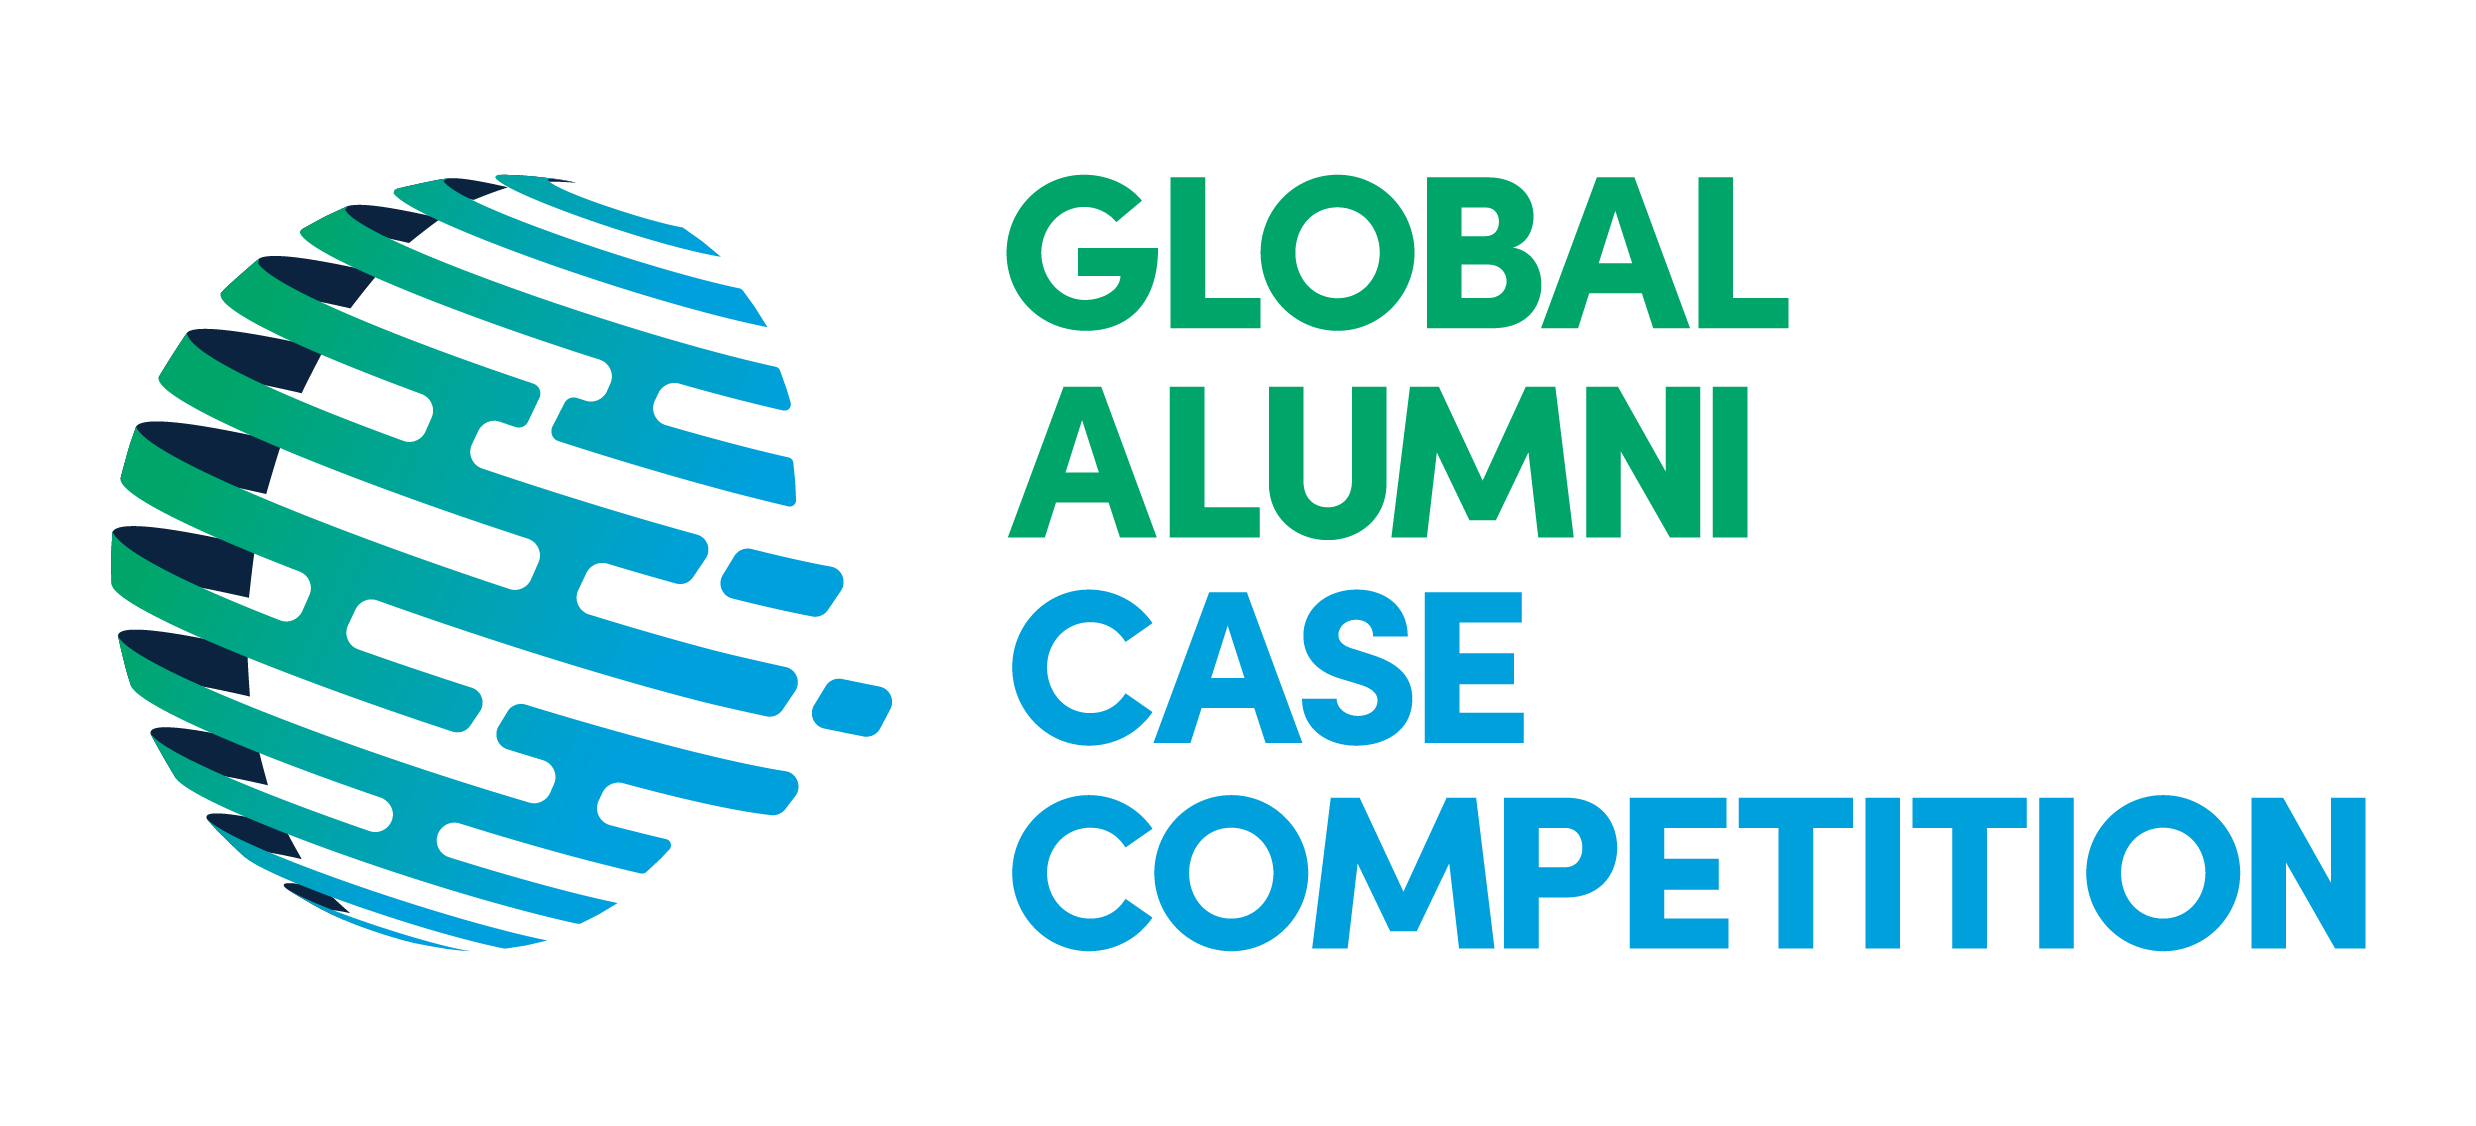 Global Alumni Case Competition